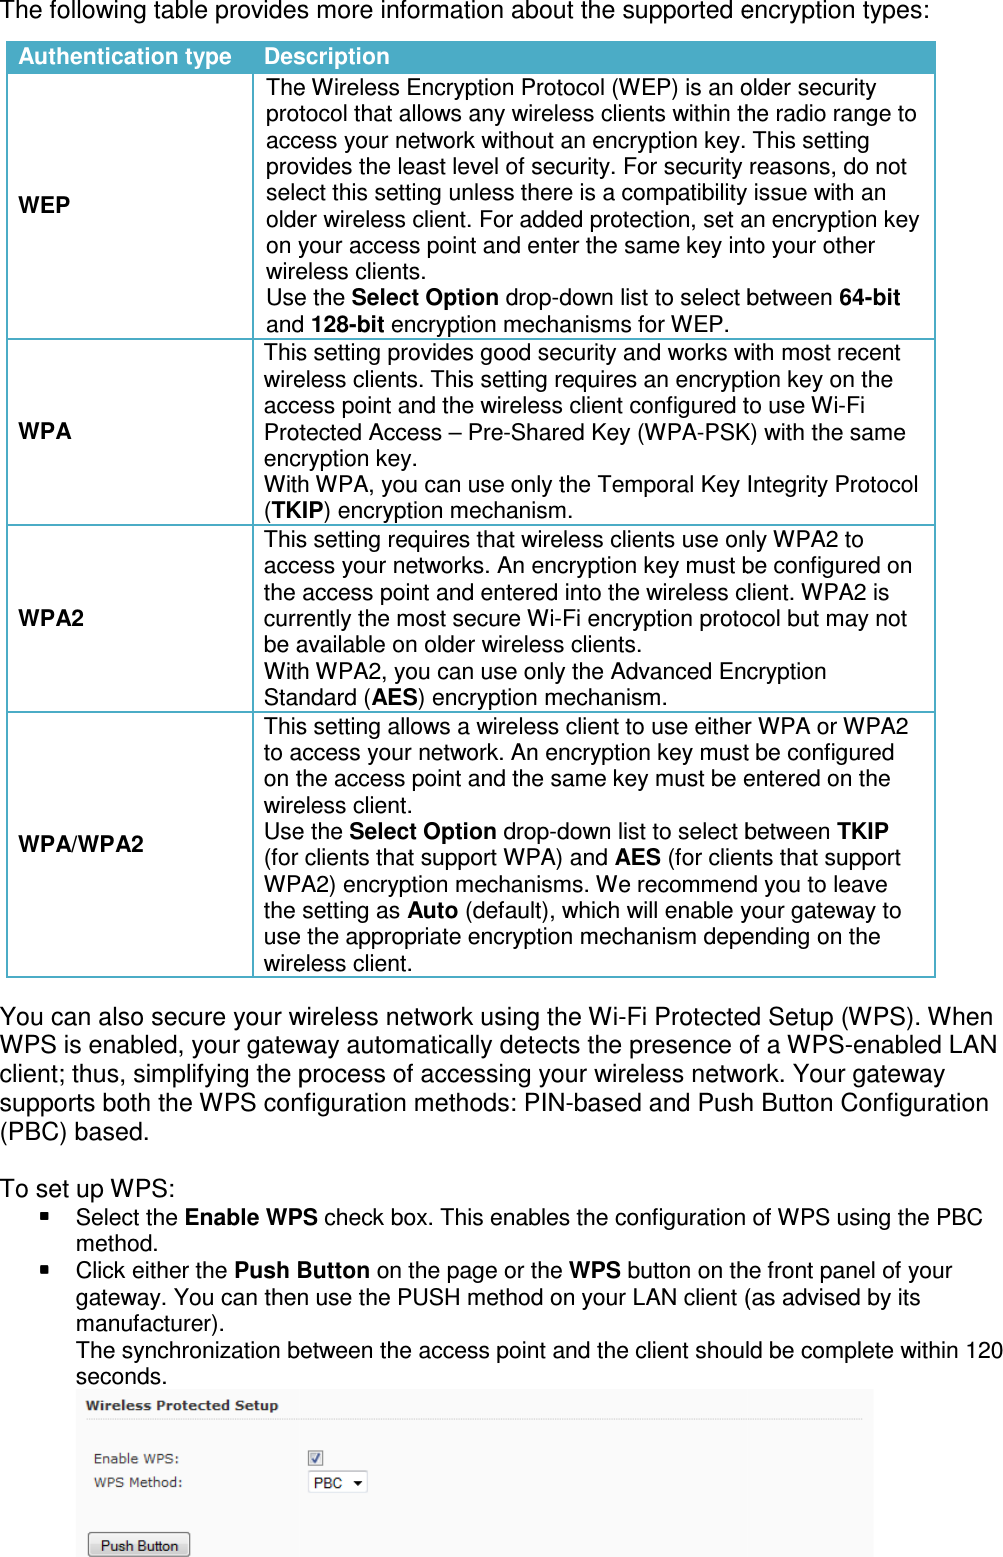 The following table provides more information about the                                   You can also secure your wireless network using the WiWPS is enabled, your gateway automatically detects the presence of a WPSclient; thus, simplifying the process of accessing your wireless networksupports both the WPS configuration methods: PIN(PBC) based.   To set up WPS:  Select the Enable WPSmethod.  Click either the Push Buttongateway. You can then use the PUSH method on your LAN client (as advised by its manufacturer). The synchronization between the access point and the client shouldseconds. Authentication type DescriptionWEP The Wireless Encryption Protocol (WEP) is an older security protocol that allowsaccess your network without anprovides the least select this setting unless there is a compatibility issue with anolder wireless client. For added protection, set an encryption key on your accesswireless clients.Use the and WPA This setting provides good security and works with most wireless clients.access point and the wireless clientProtected Access encryption key.With WPA, you can use only (TKIPWPA2 This setting requires that wireless clients use only WPA2 to access yourthe access point and enteredcurrently tbe available on older wireless clients.With WPA2, you can use only the Standard WPA/WPA2 This setting allows a wireless client to use either WPAto access your network. An encryption key on the access pointwireless client.Use the (for clients that support WPA)WPA2)the setting as use the appropriate encryption mechanism depending on the wireless client.The following table provides more information about the supported encryption typesYou can also secure your wireless network using the Wi-Fi Protected Setup (WPS). When WPS is enabled, your gateway automatically detects the presence of a WPSprocess of accessing your wireless networksupports both the WPS configuration methods: PIN-based and Push Button Configuration Enable WPS check box. This enables the configuration of WPS using the PBCPush Button on the page or the WPS button on the front panel of your gateway. You can then use the PUSH method on your LAN client (as advised by its The synchronization between the access point and the client shouldDescription The Wireless Encryption Protocol (WEP) is an older security protocol that allows any wireless clients within the radio range to access your network without an encryption key. This setting provides the least level of security. For security select this setting unless there is a compatibility issue with anolder wireless client. For added protection, set an encryption key on your access point and enter the same key into your other wireless clients. Use the Select Option drop-down list to select between and 128-bit encryption mechanisms for WEP.  This setting provides good security and works with most wireless clients. This setting requires an encryption key on the access point and the wireless client configured to use WiProtected Access – Pre-Shared Key (WPA-PSK) with the encryption key. With WPA, you can use only the Temporal Key Integrity ProtocolTKIP) encryption mechanism. This setting requires that wireless clients use only WPA2 to access your networks. An encryption key must be configured on the access point and entered into the wireless client. WPA2currently the most secure Wi-Fi encryption protocol bbe available on older wireless clients. With WPA2, you can use only the Advanced Encryption Standard (AES) encryption mechanism. This setting allows a wireless client to use either WPAaccess your network. An encryption key must be configured on the access point and the same key must be entered on the wireless client. Use the Select Option drop-down list to select between (for clients that support WPA) and AES (for clients that support WPA2) encryption mechanisms. We recommend you to leave the setting as Auto (default), which will enable your gateway to use the appropriate encryption mechanism depending on the wireless client. encryption types: Fi Protected Setup (WPS). When WPS is enabled, your gateway automatically detects the presence of a WPS-enabled LAN process of accessing your wireless network. Your gateway based and Push Button Configuration check box. This enables the configuration of WPS using the PBC button on the front panel of your gateway. You can then use the PUSH method on your LAN client (as advised by its The synchronization between the access point and the client should be complete within 120  The Wireless Encryption Protocol (WEP) is an older security any wireless clients within the radio range to encryption key. This setting level of security. For security reasons, do not select this setting unless there is a compatibility issue with an older wireless client. For added protection, set an encryption key ter the same key into your other down list to select between 64-bit  This setting provides good security and works with most recent requires an encryption key on the configured to use Wi-Fi PSK) with the same Temporal Key Integrity Protocol This setting requires that wireless clients use only WPA2 to networks. An encryption key must be configured on into the wireless client. WPA2 is protocol but may not Advanced Encryption This setting allows a wireless client to use either WPA or WPA2 must be configured and the same key must be entered on the down list to select between TKIP (for clients that support encryption mechanisms. We recommend you to leave (default), which will enable your gateway to use the appropriate encryption mechanism depending on the 